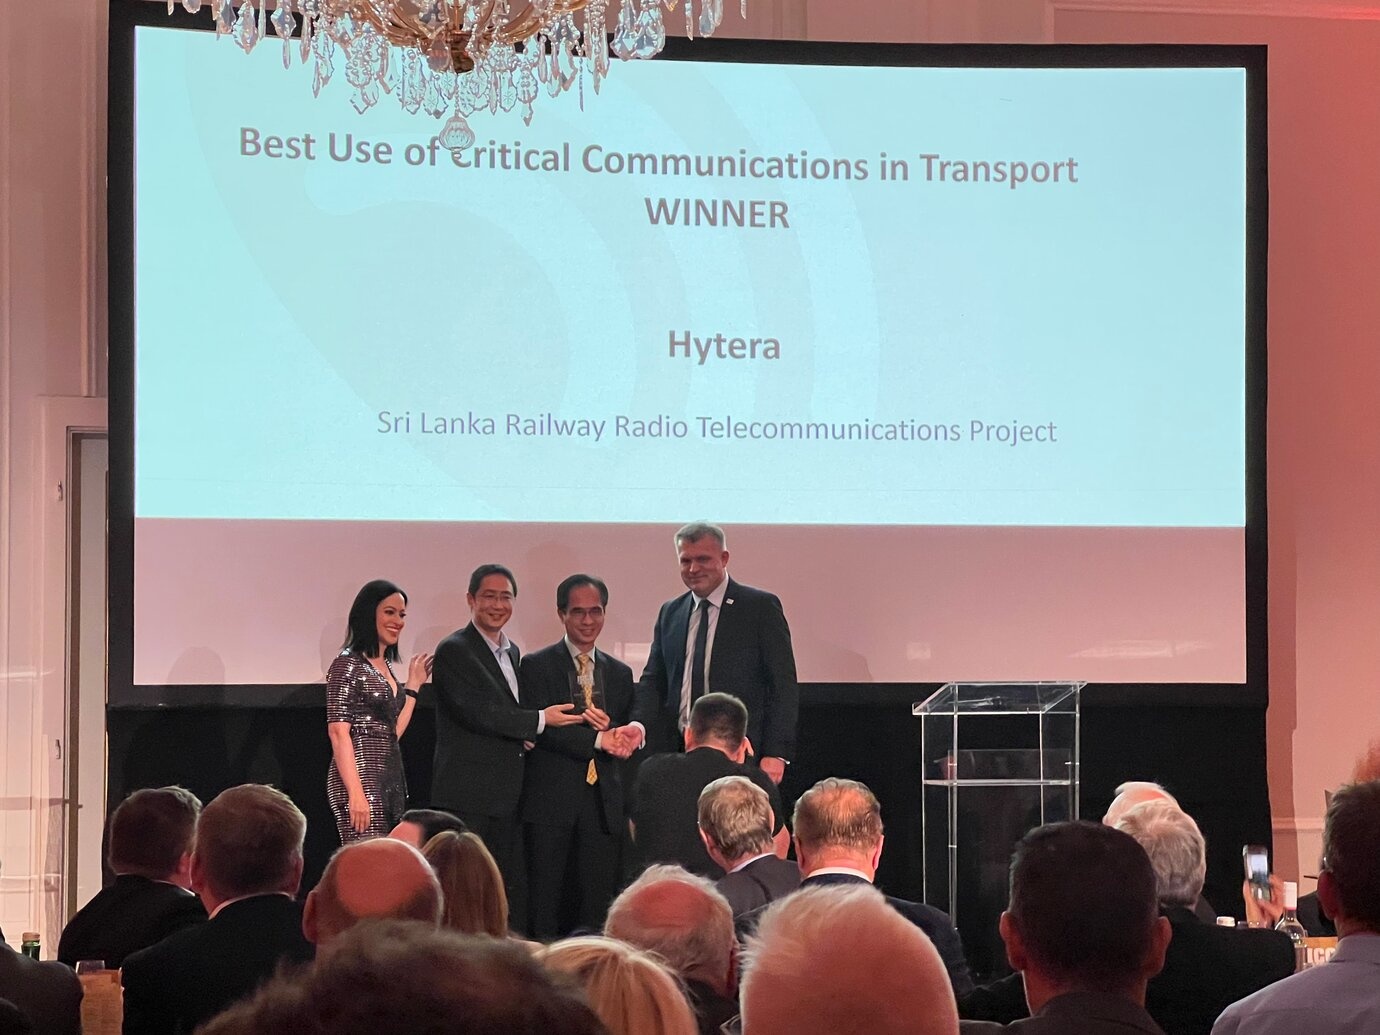 Hytera honoured at the International Critical Communications Awards 2022